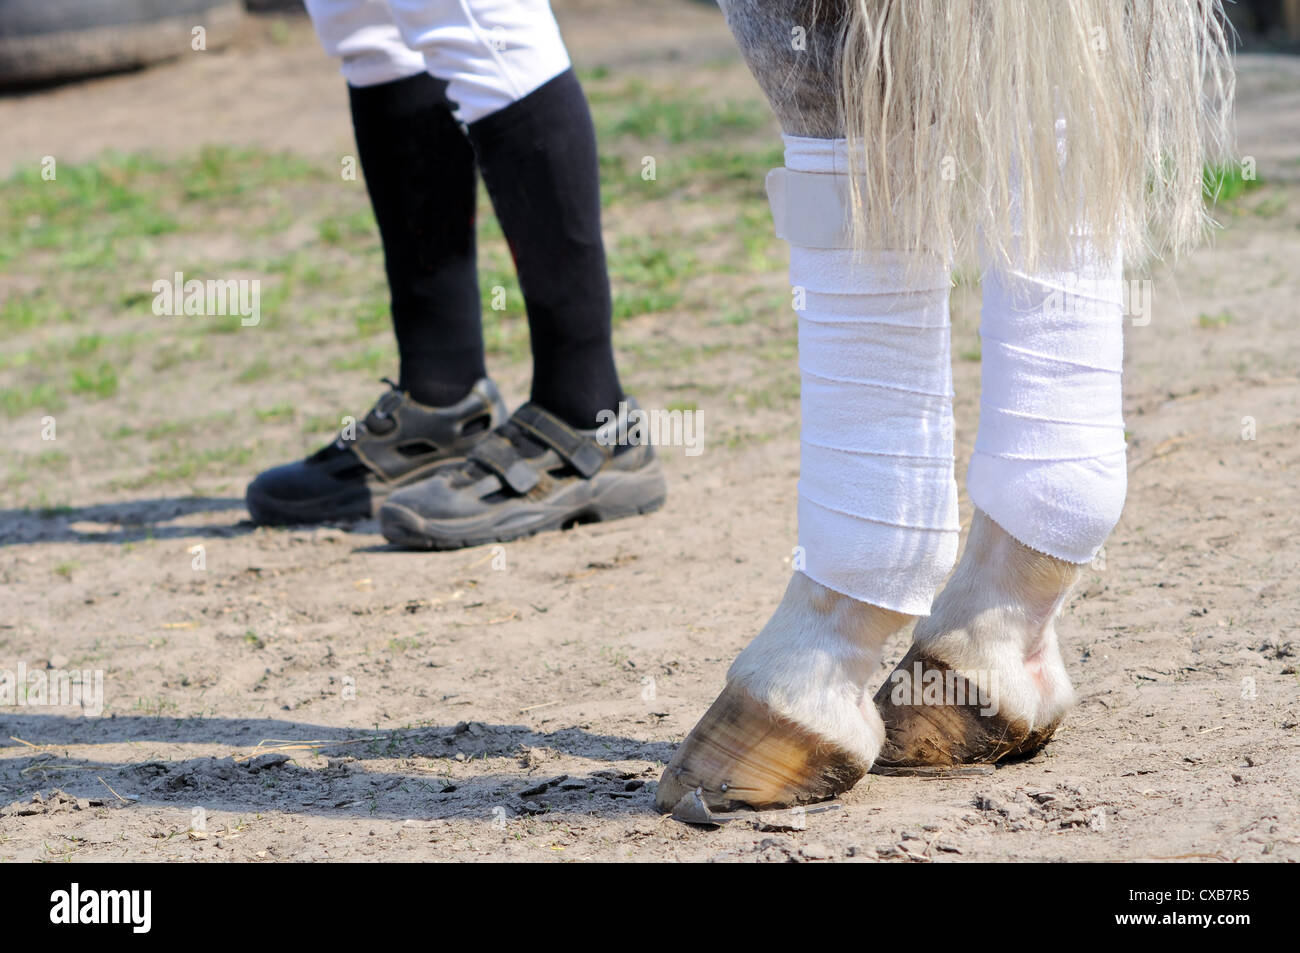 human legs and horse legs, focused on foreground Stock Photo